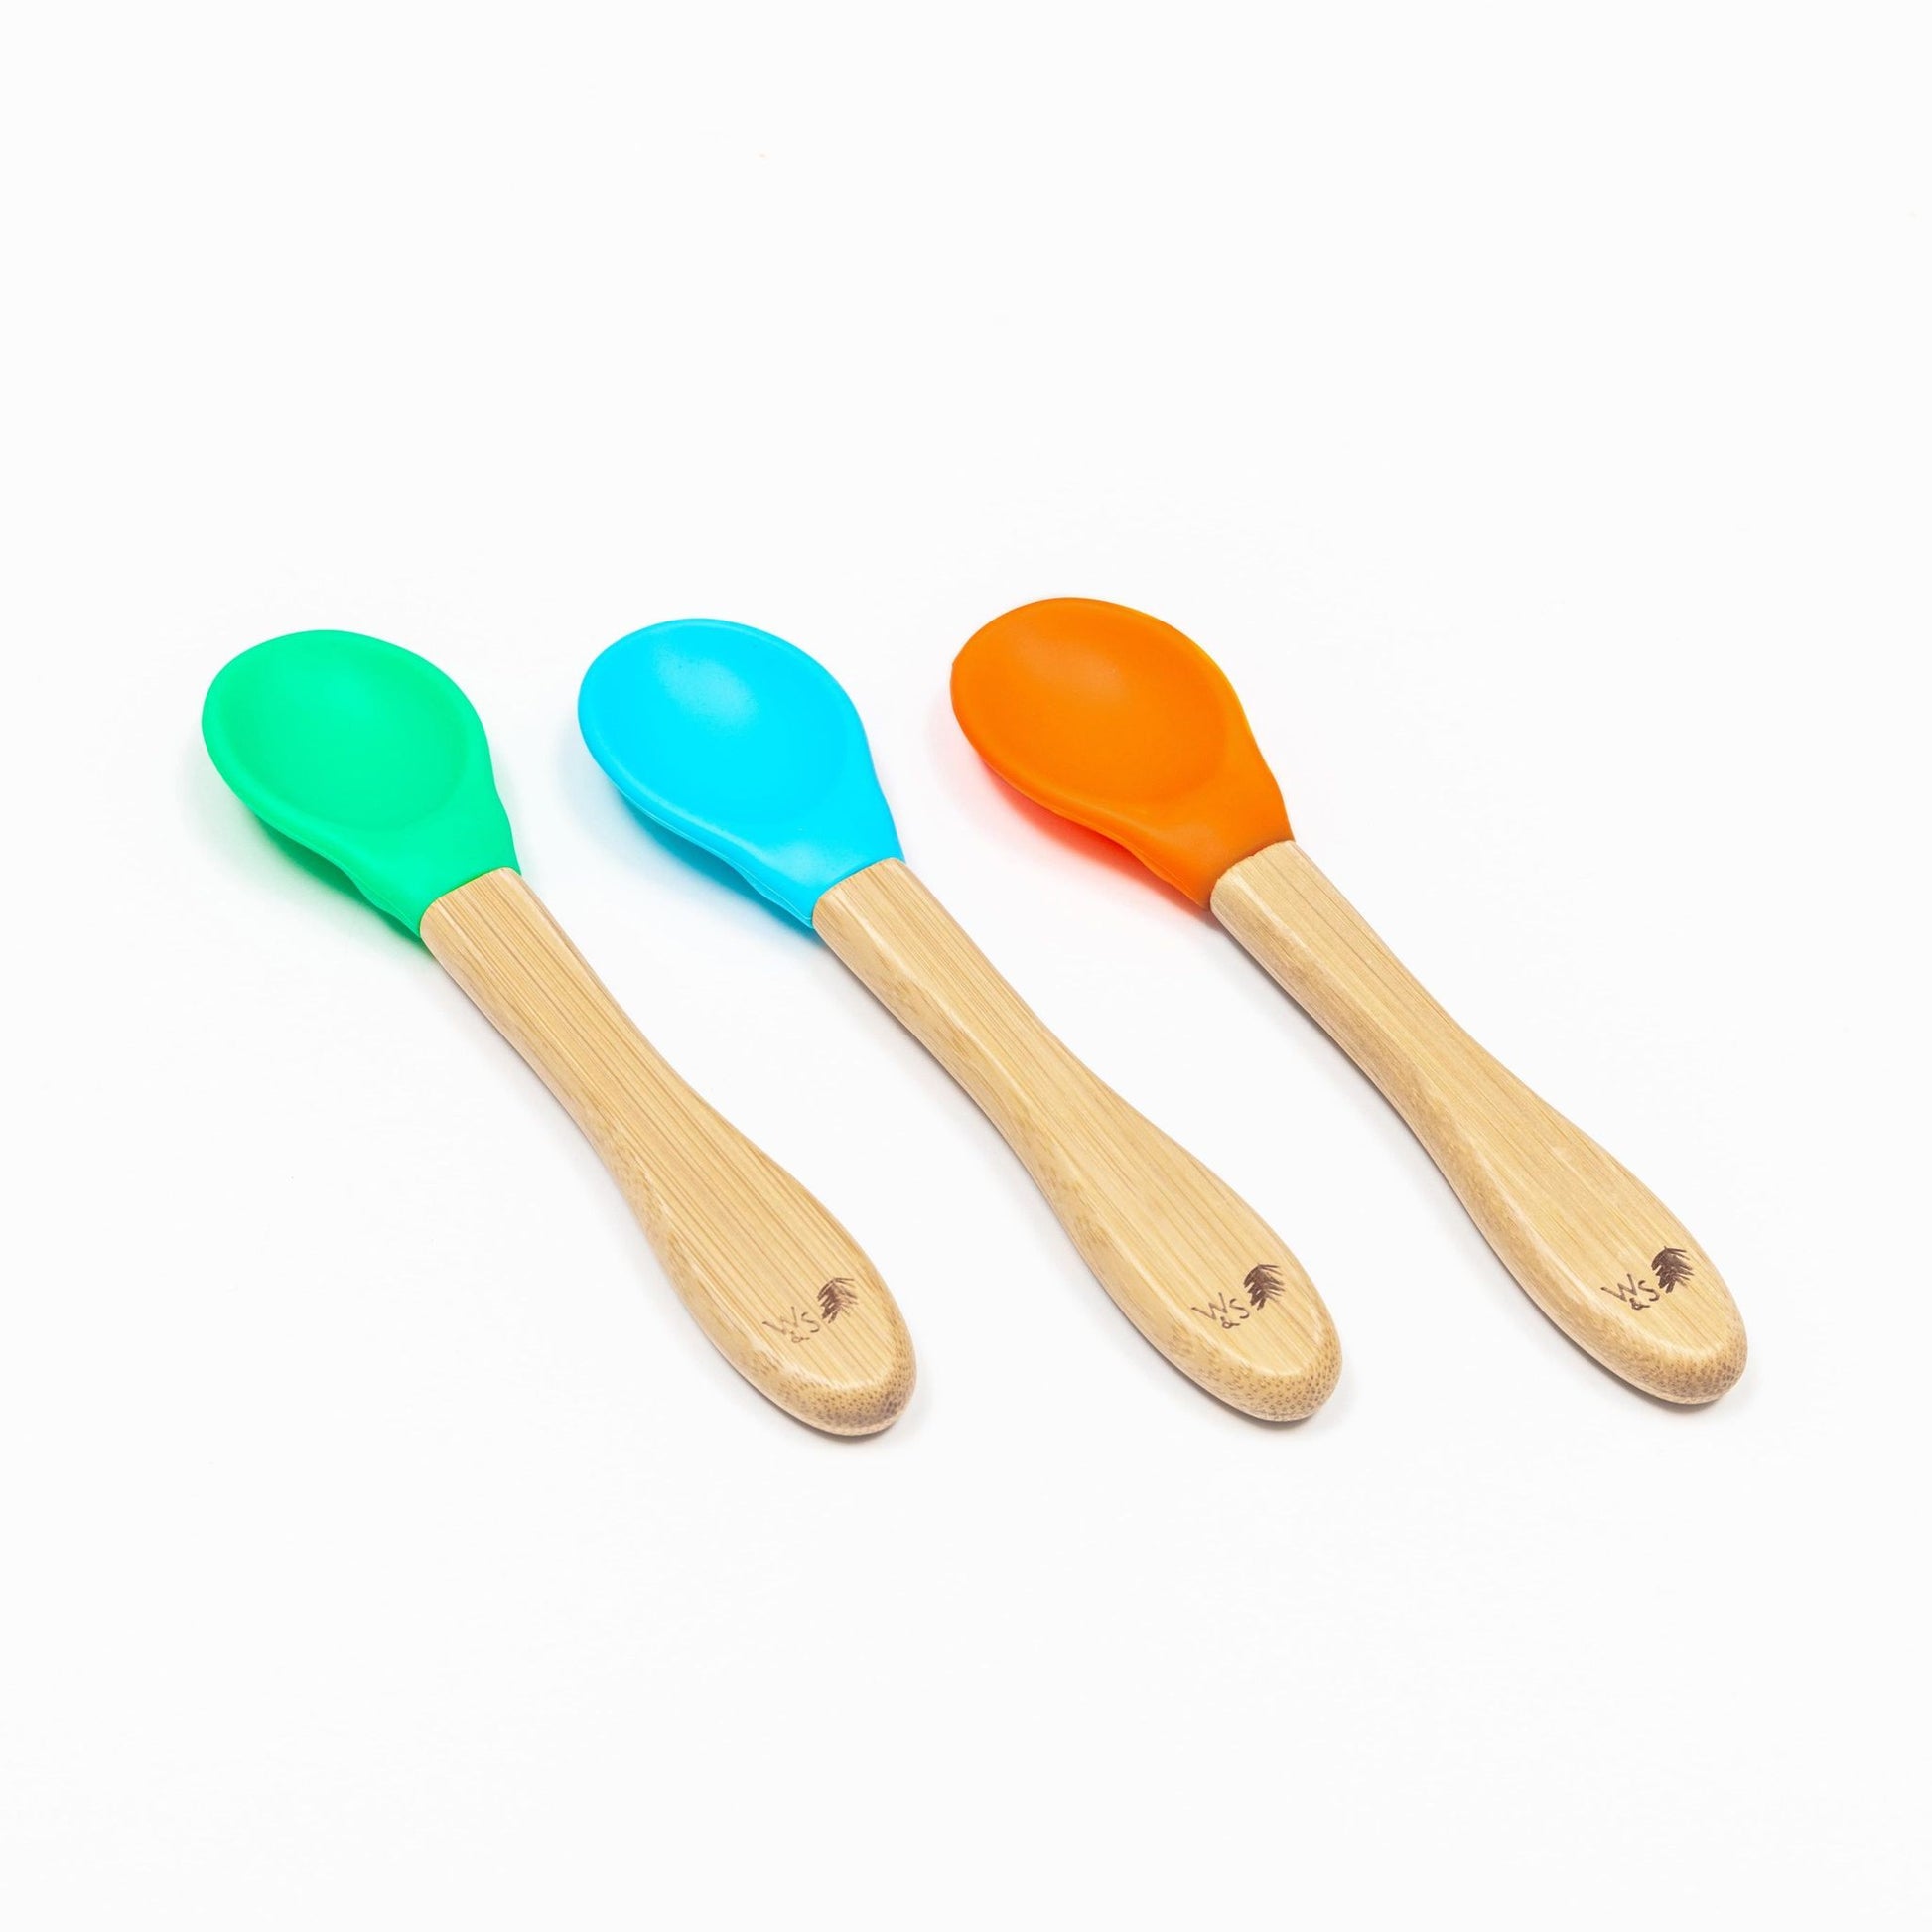 Wild & Stone Baby Bamboo Weaning Spoons - Set of 3 - Blue/Green/Orange